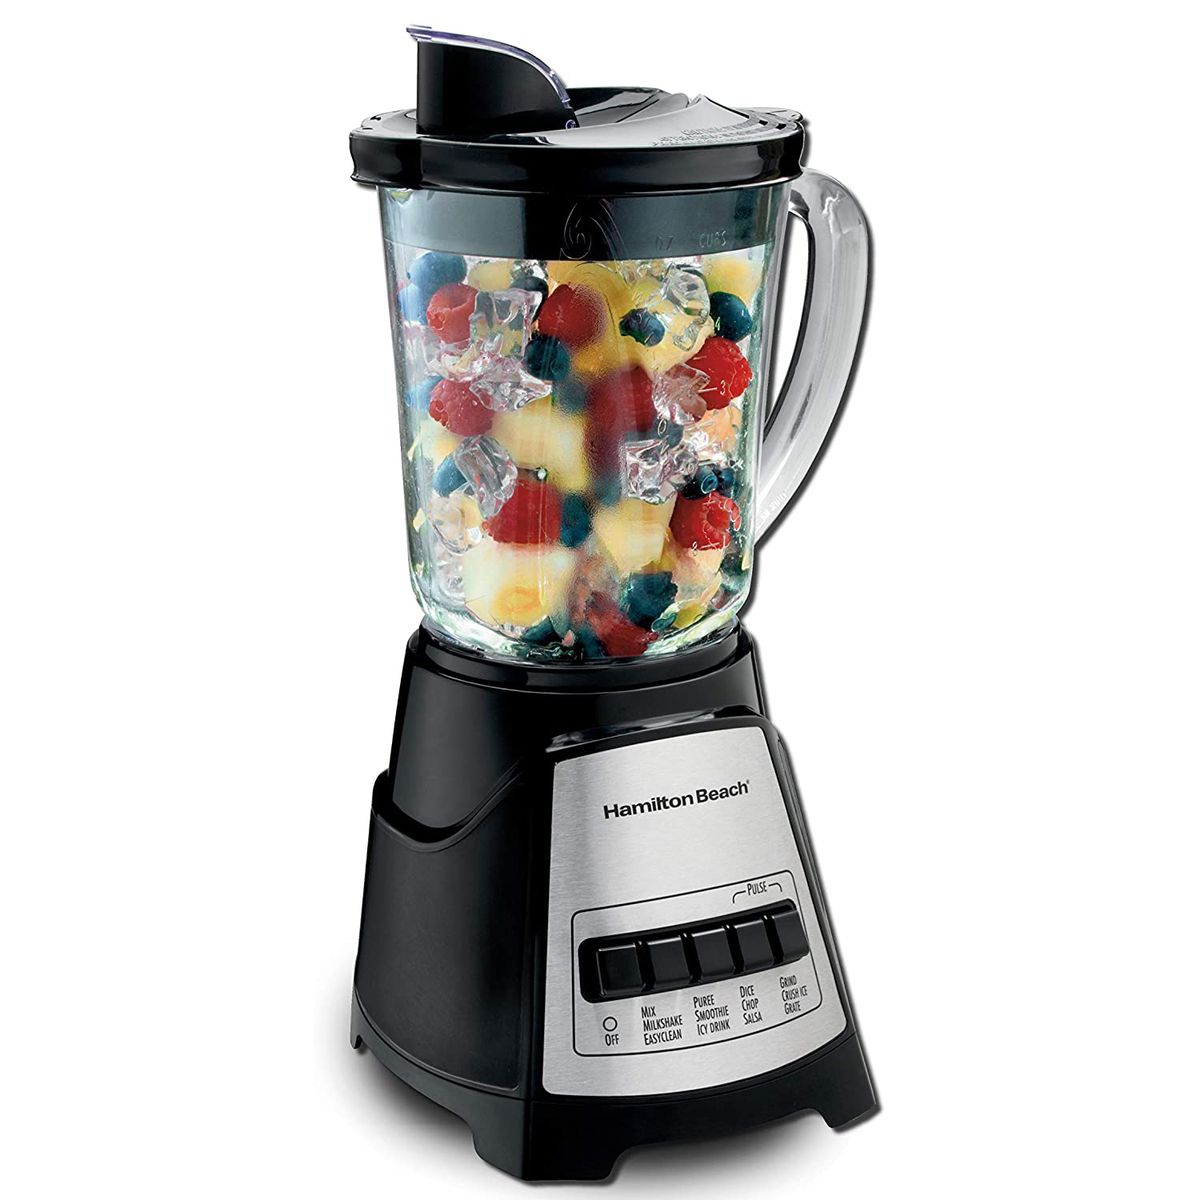 Hamilton Beach Power Elite Blender with 12 Functions for Puree